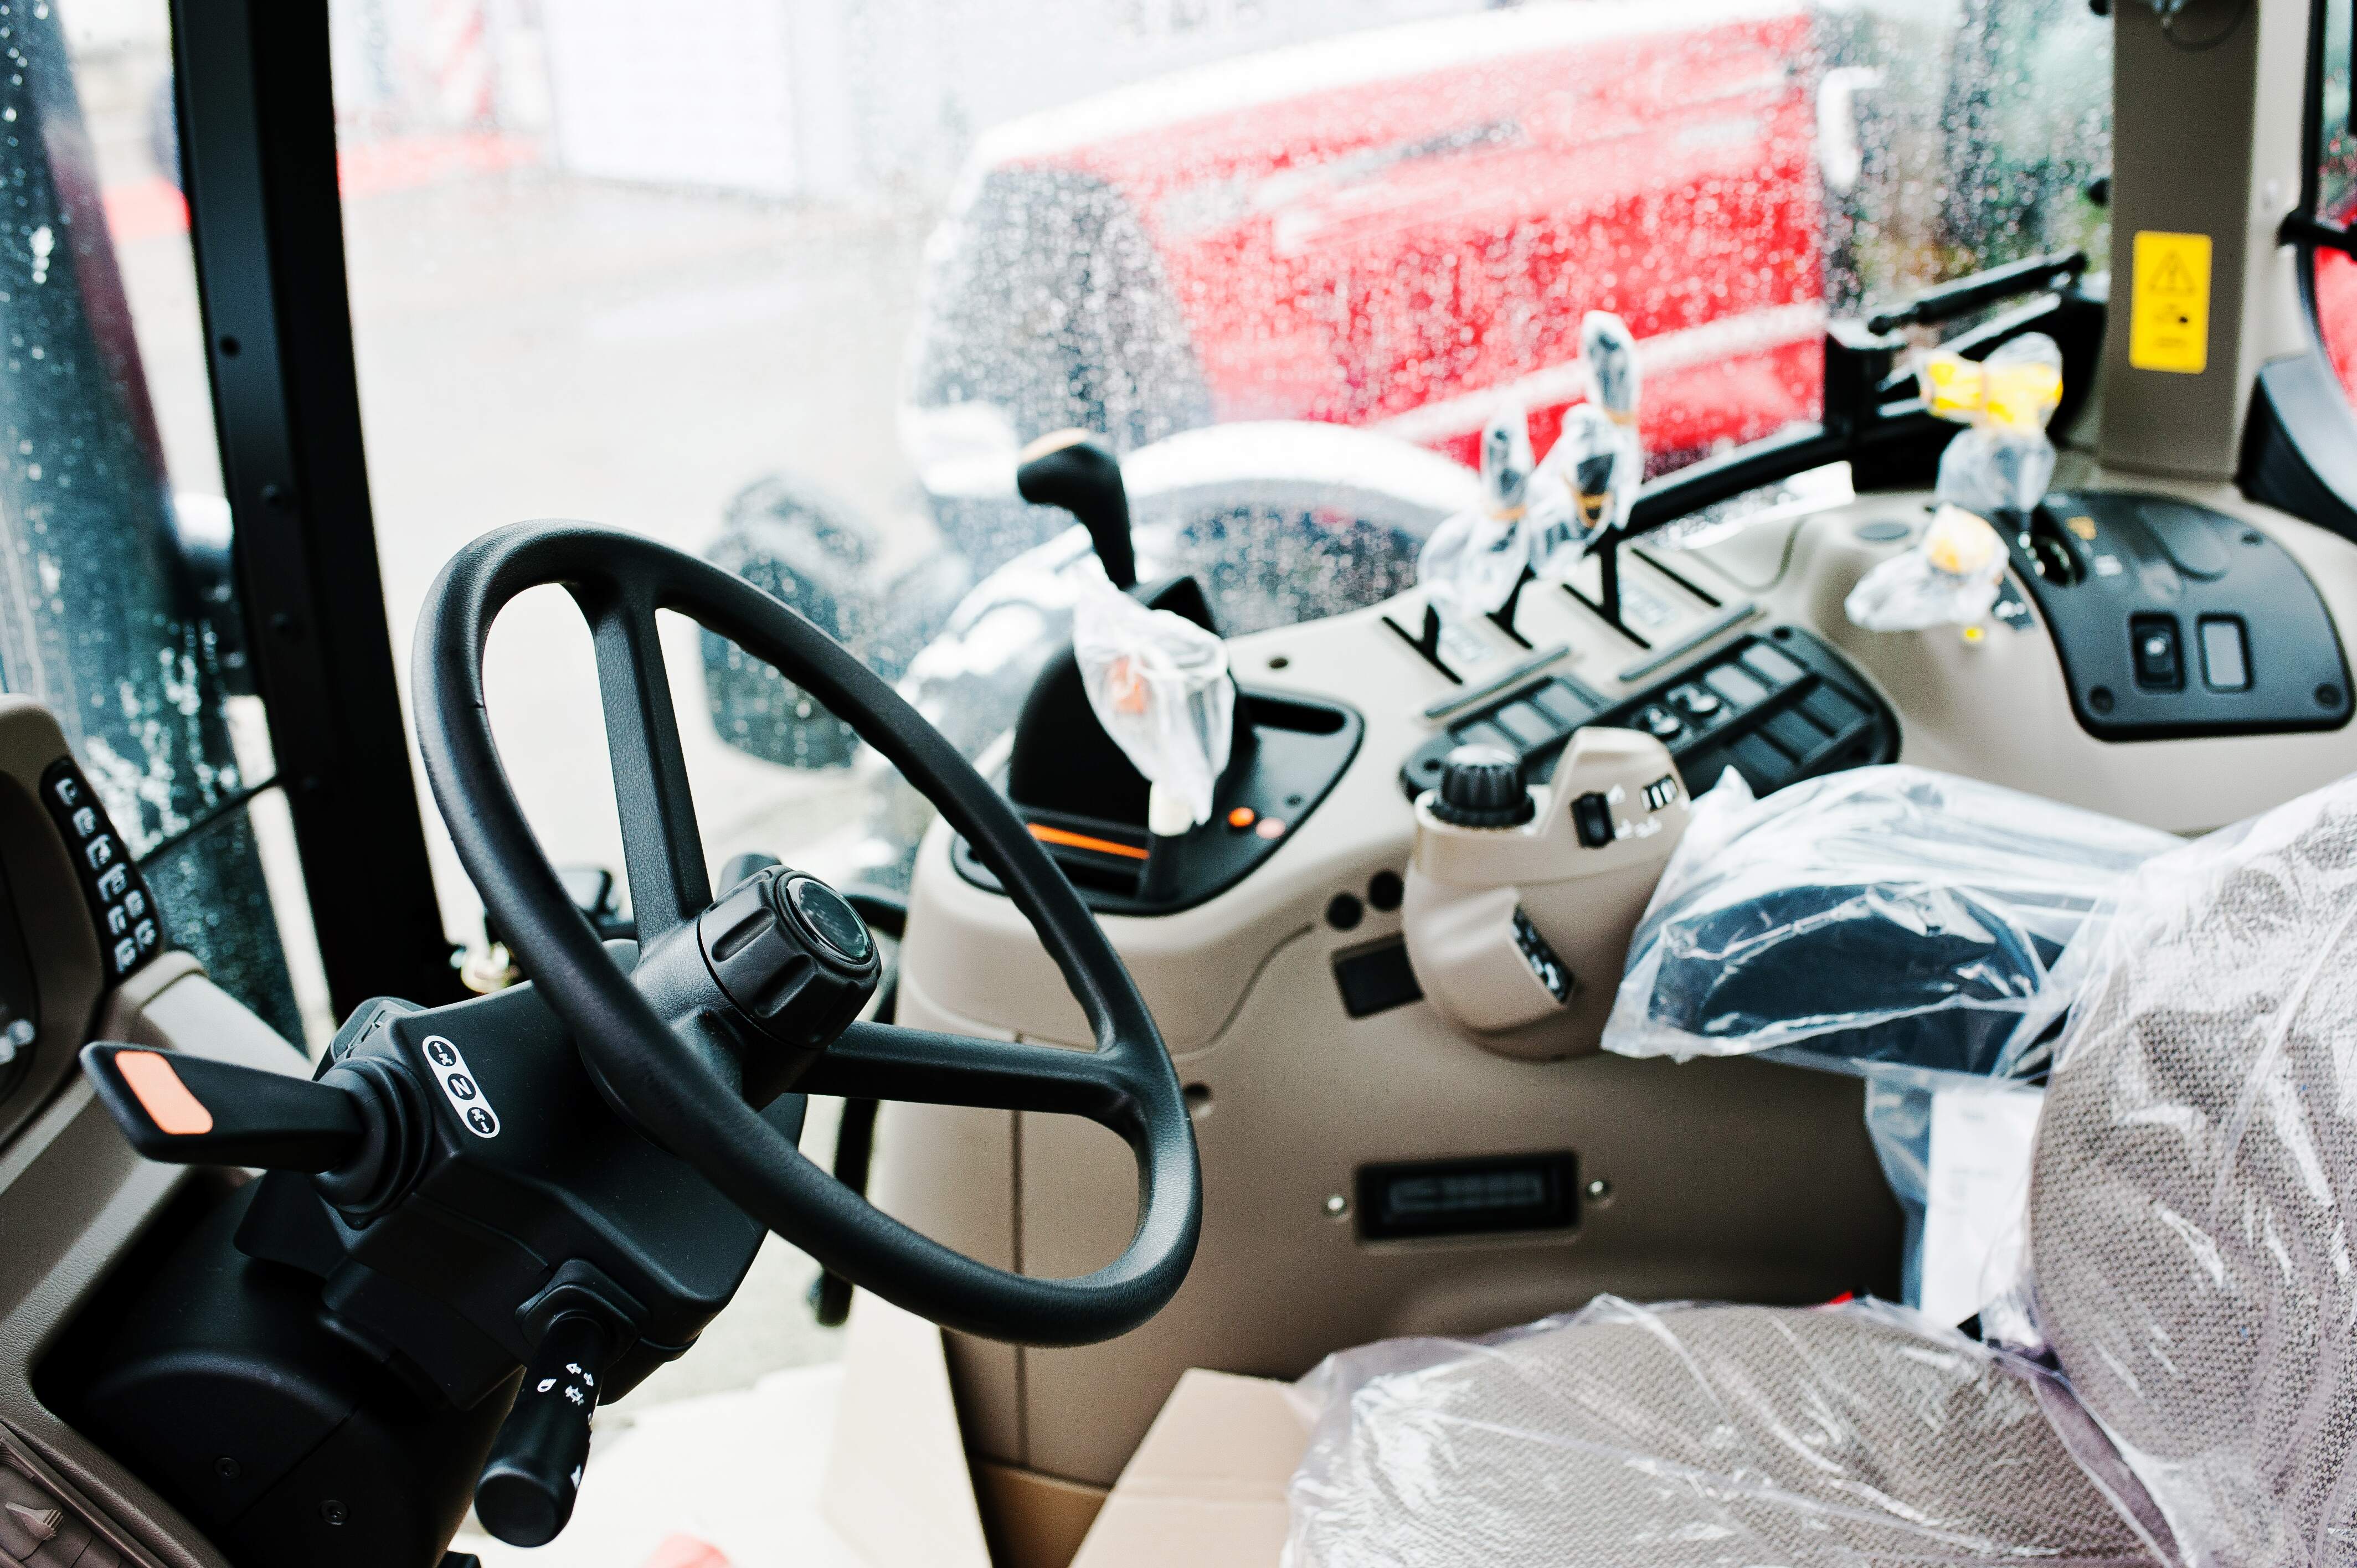 <h3>We ship or deliver</h3><h6>We ship your parts anywhere and deliver to most of Utah. Call us to find out about delivery (801) 544-1835.</h6>